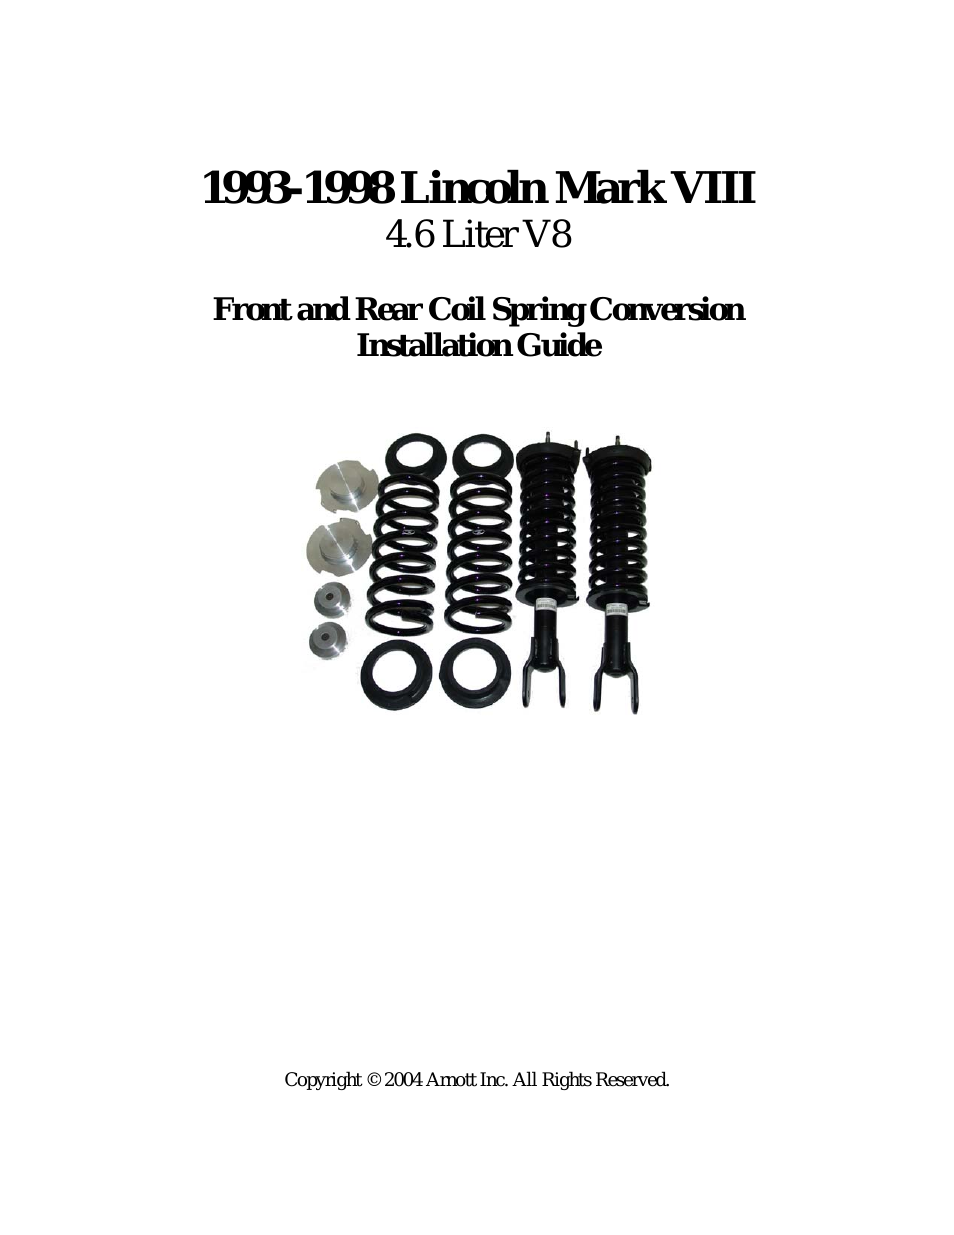 Front and Rear Coil Spring Conversion LINCOLN Mark VIII